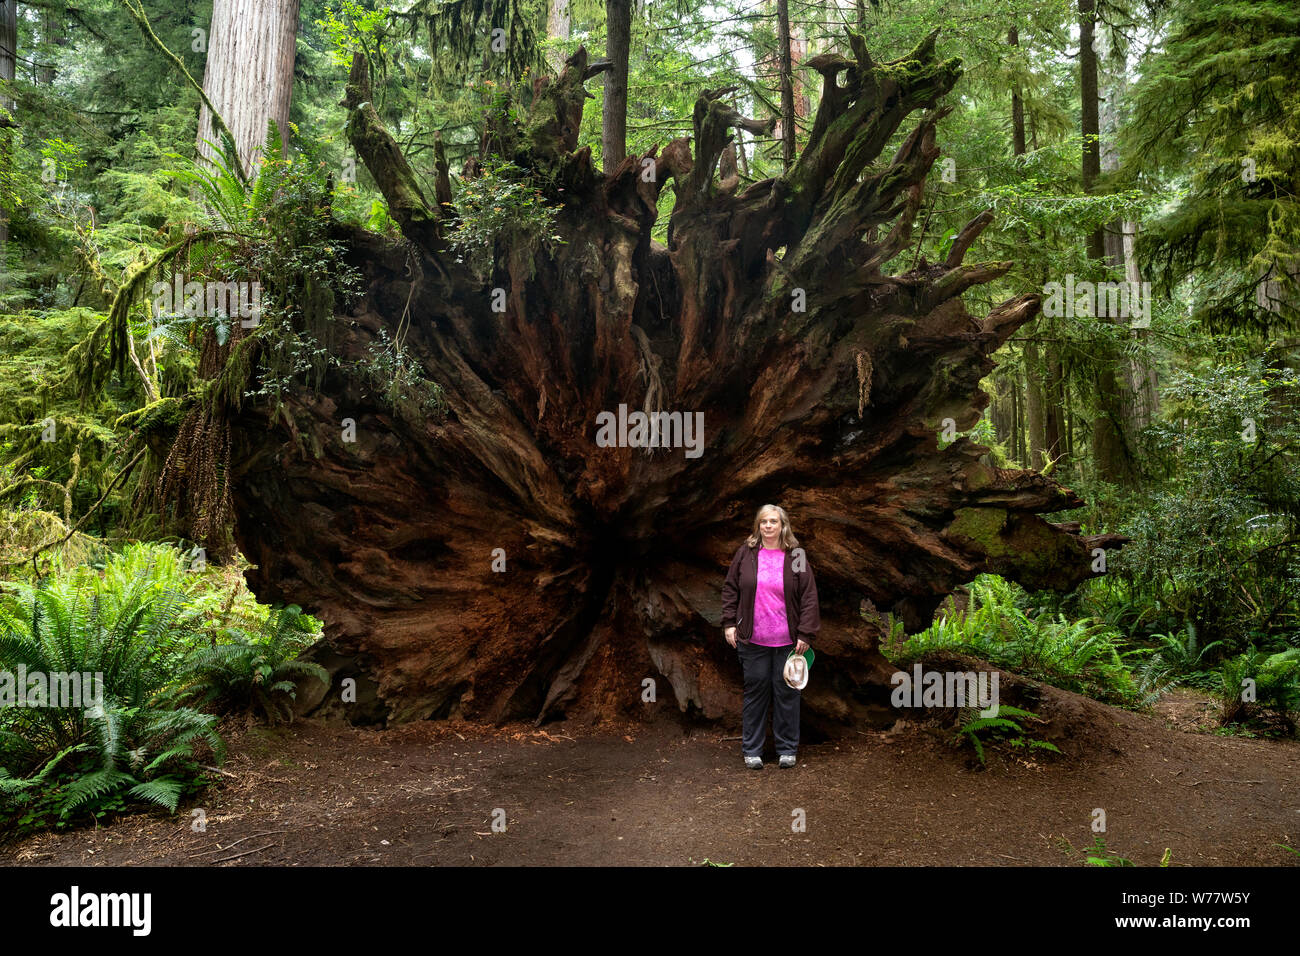 CA03434-00...CALIFORNIA - Karen Pippenger stands next to a redwood tree root ball in Redwoods National Park. Stock Photo